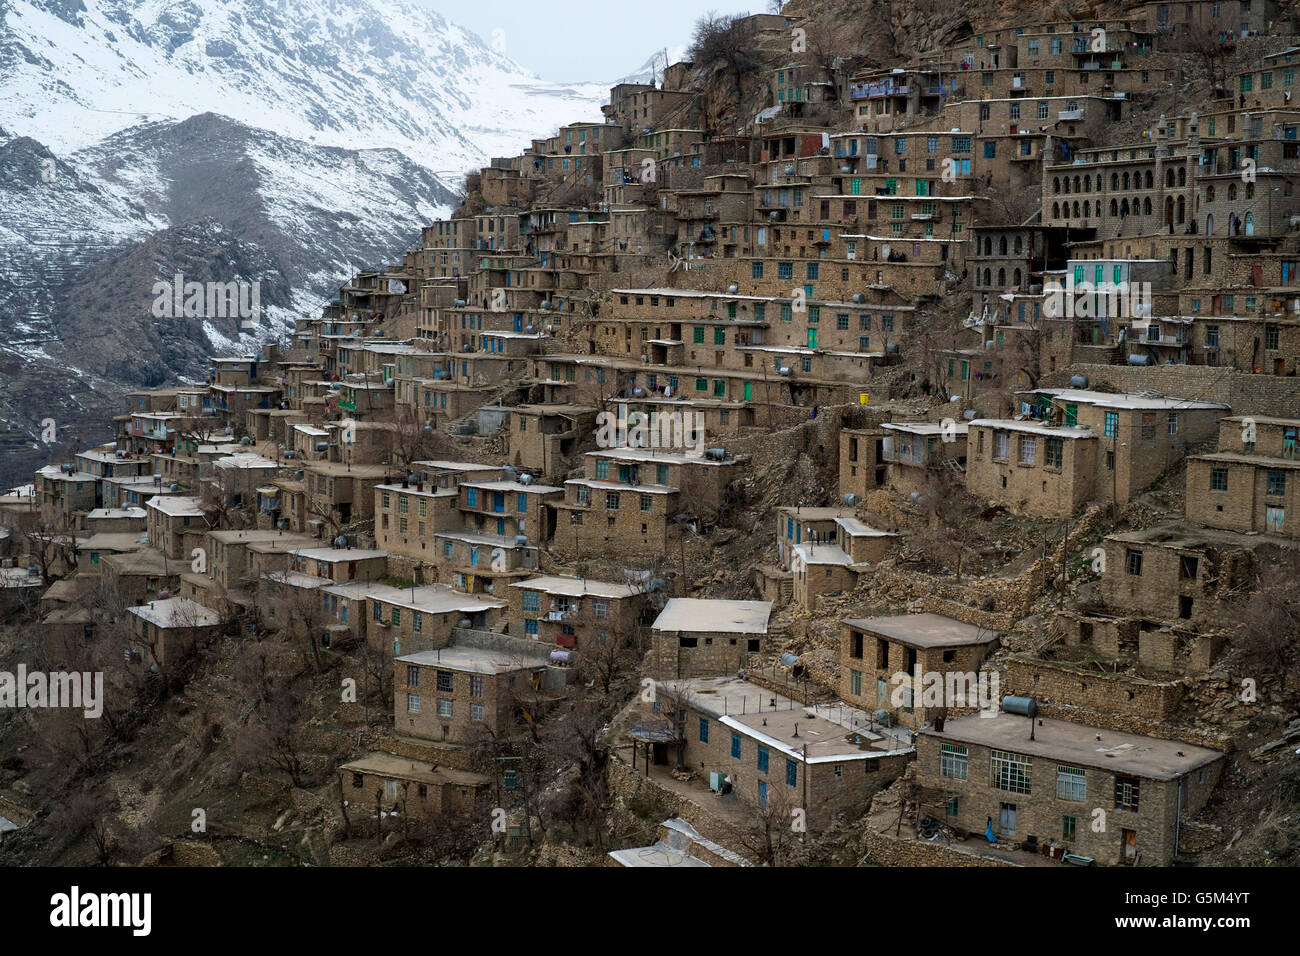 The ancient village in Zagros Mountains, Iran Stock Photo